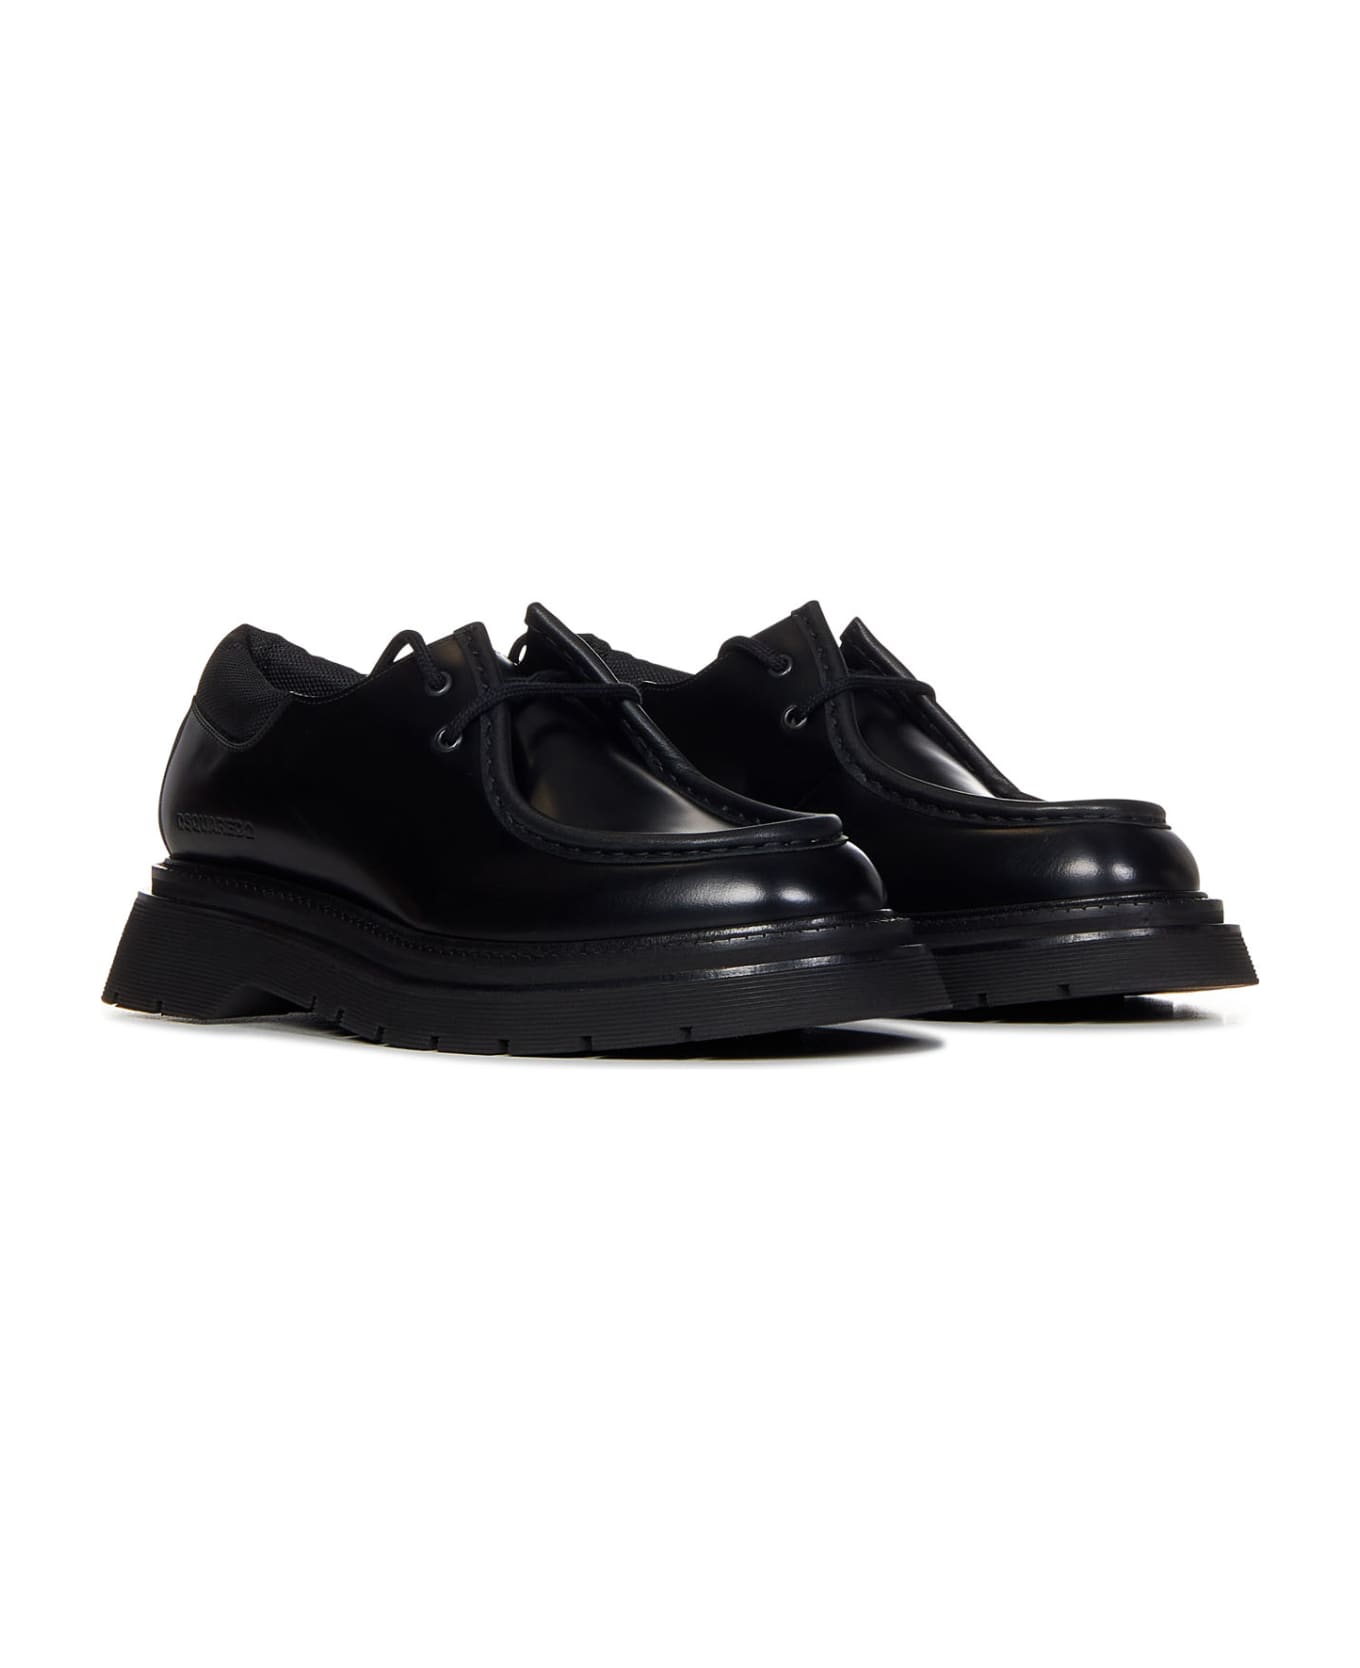 Dsquared2 Laced Up Shoes - Black